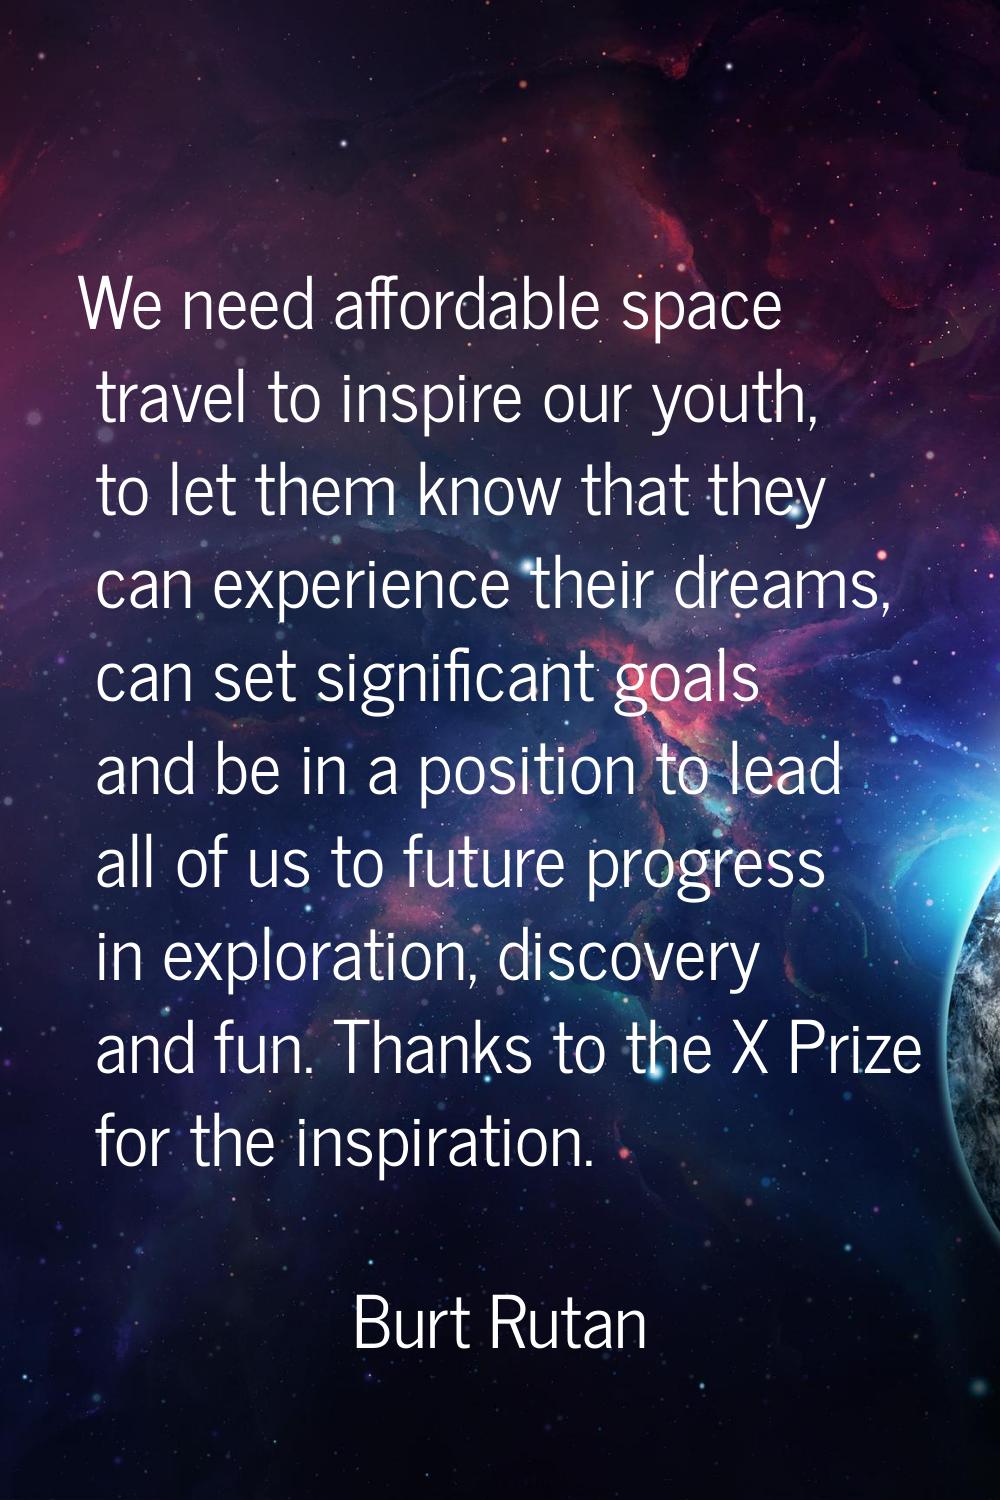 We need affordable space travel to inspire our youth, to let them know that they can experience the